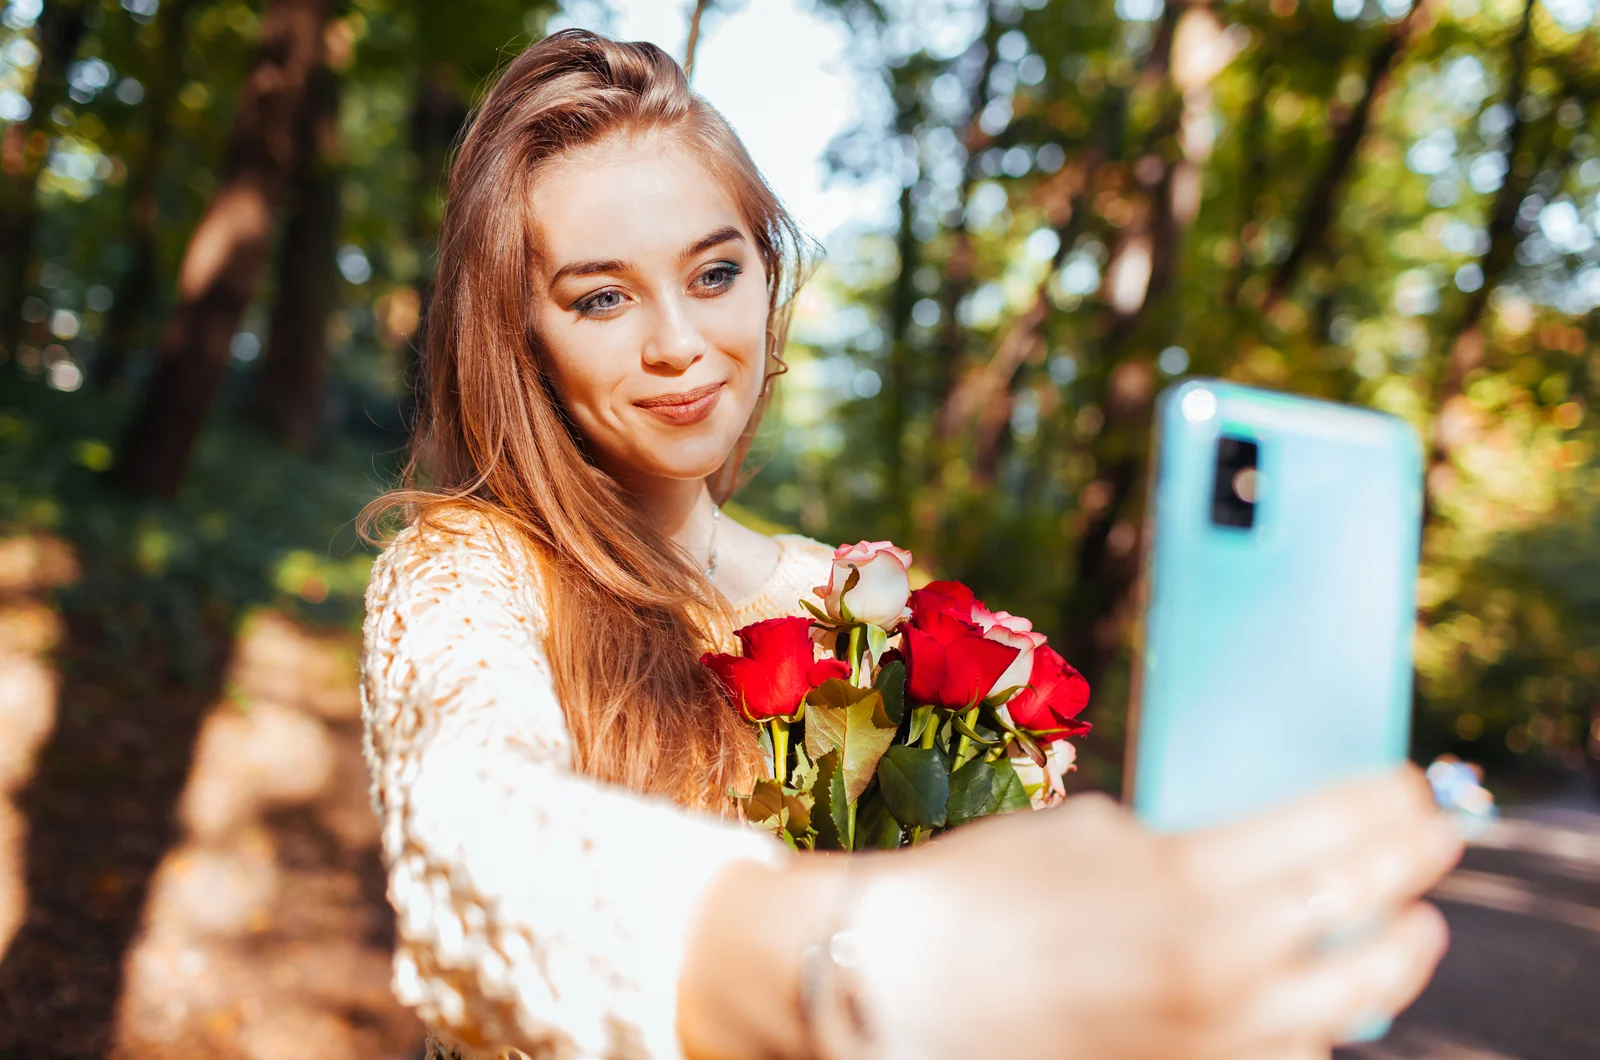 a woman with long brown hair takes a picture with a bouquet of roses